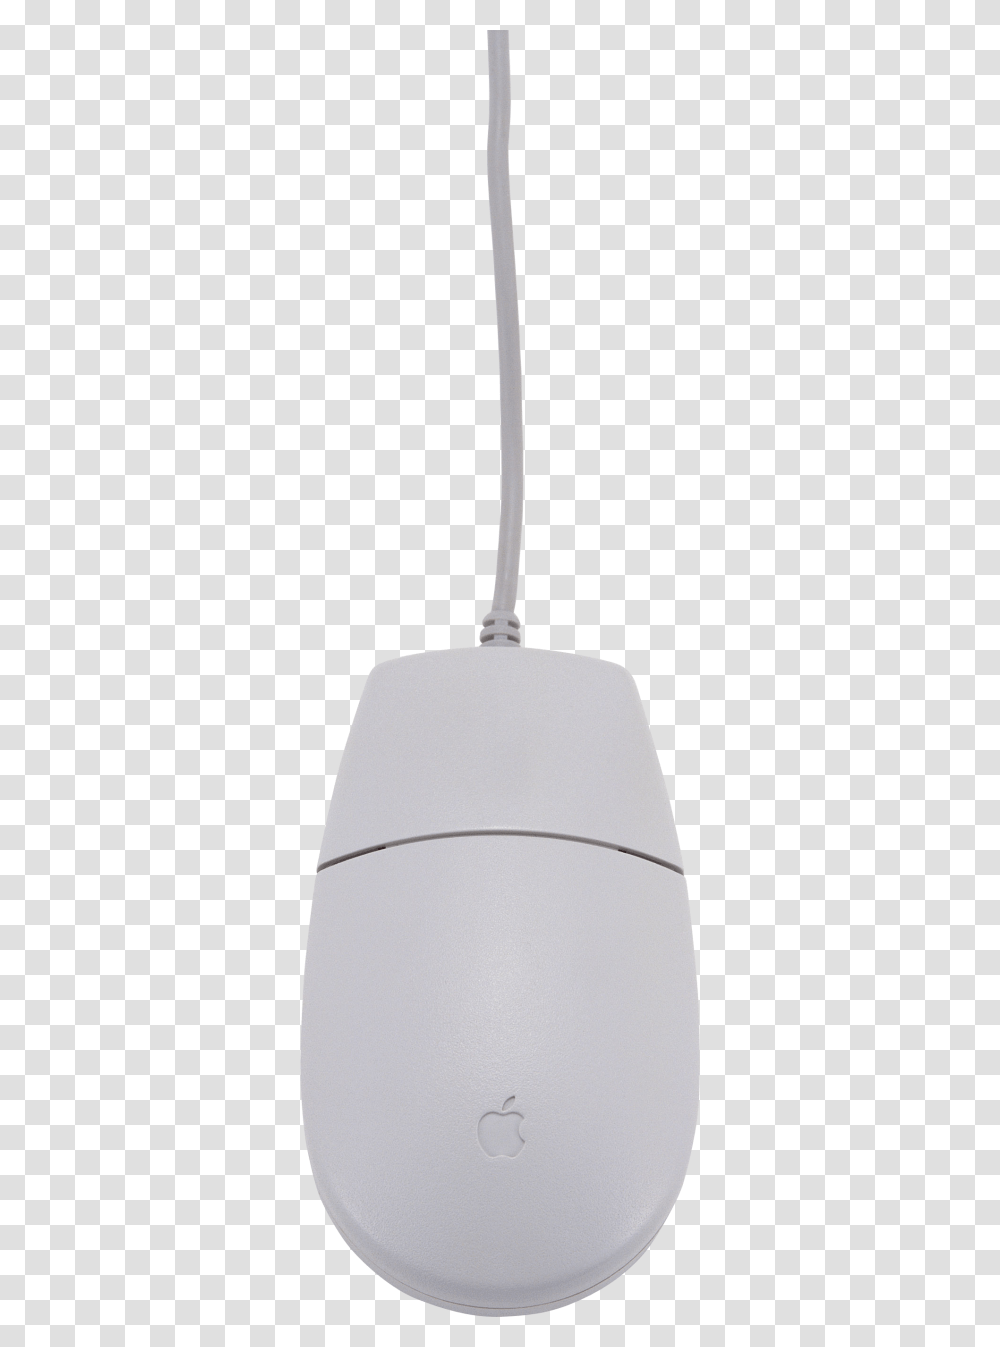 Background Clipart A Computer Mouse, Lampshade, Shovel, Tool Transparent Png